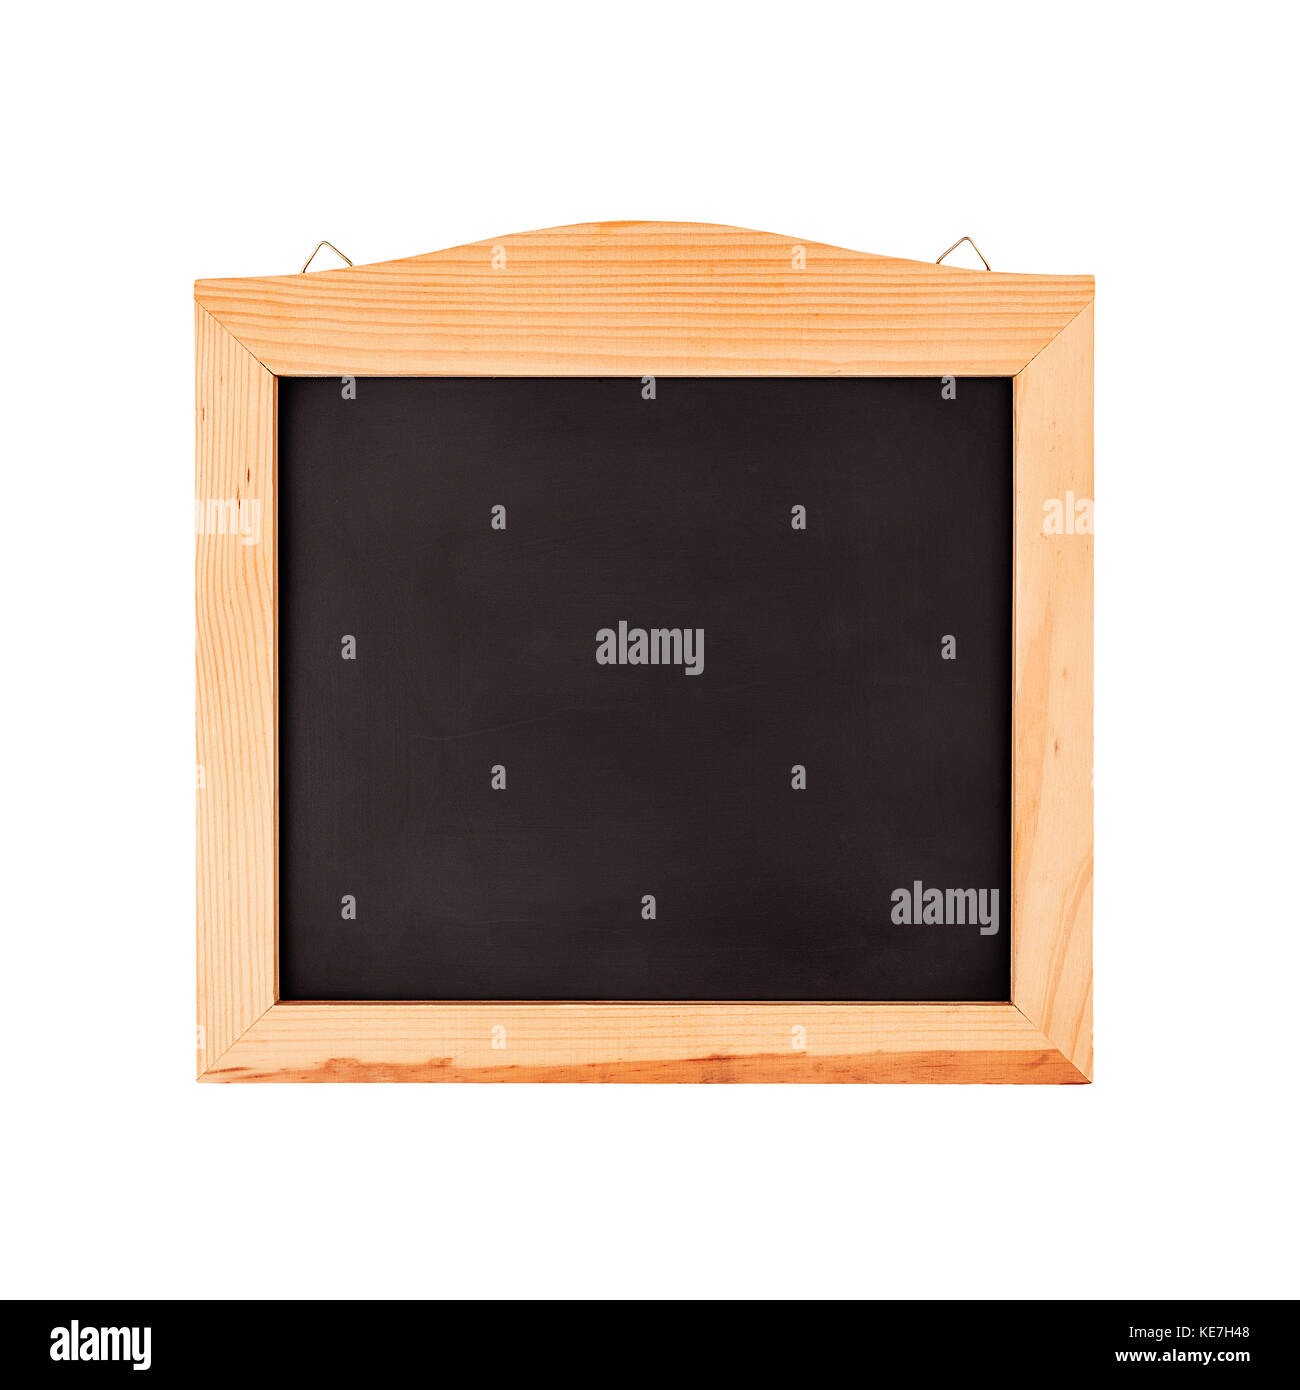 Clean black school chalkboard in a wooden frame isolated Stock Photo